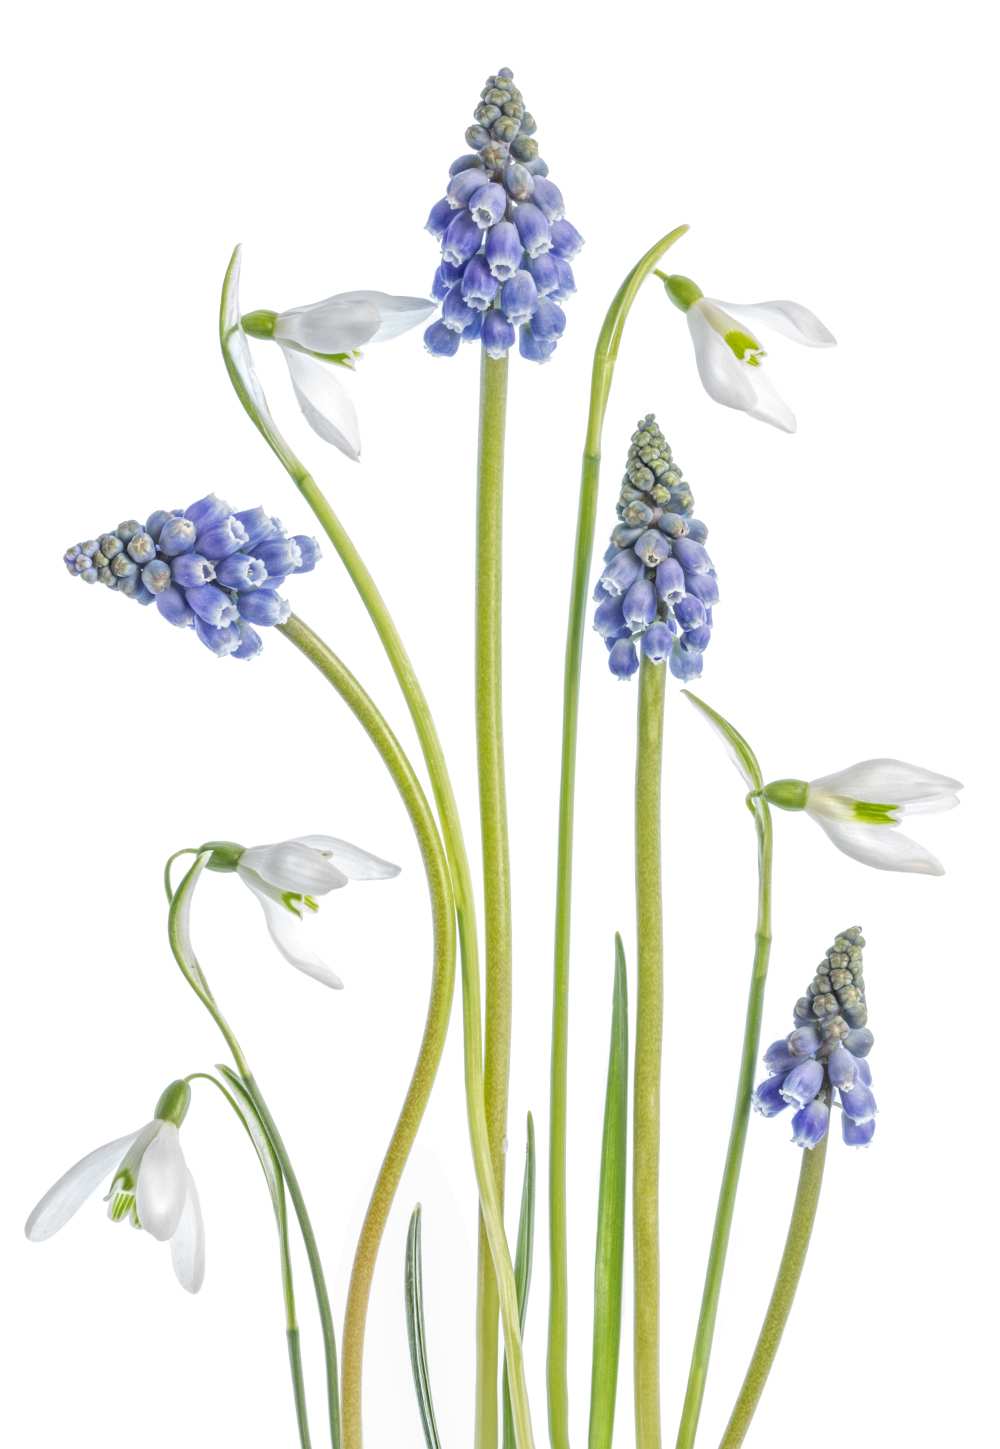 Muscari and Galanthus from Mandy Disher